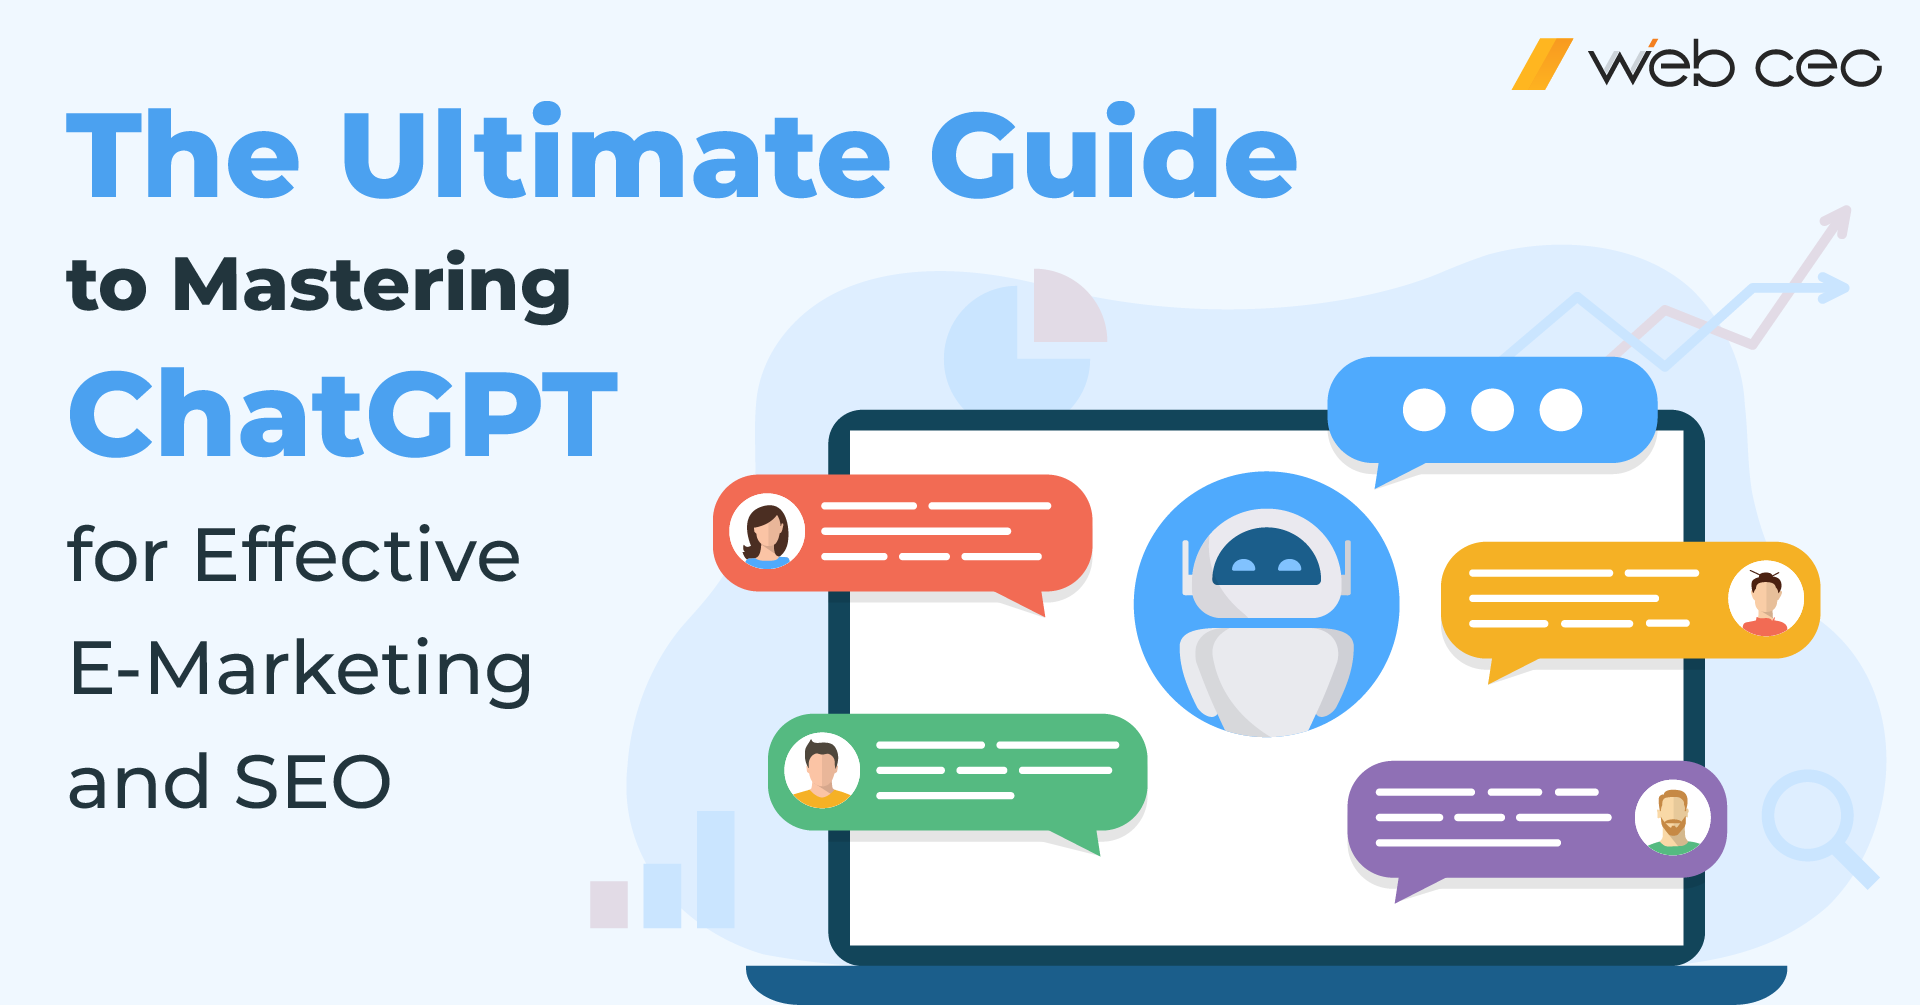 The Ultimate Guide to Mastering ChatGPT for Effective E-Marketing and SEO